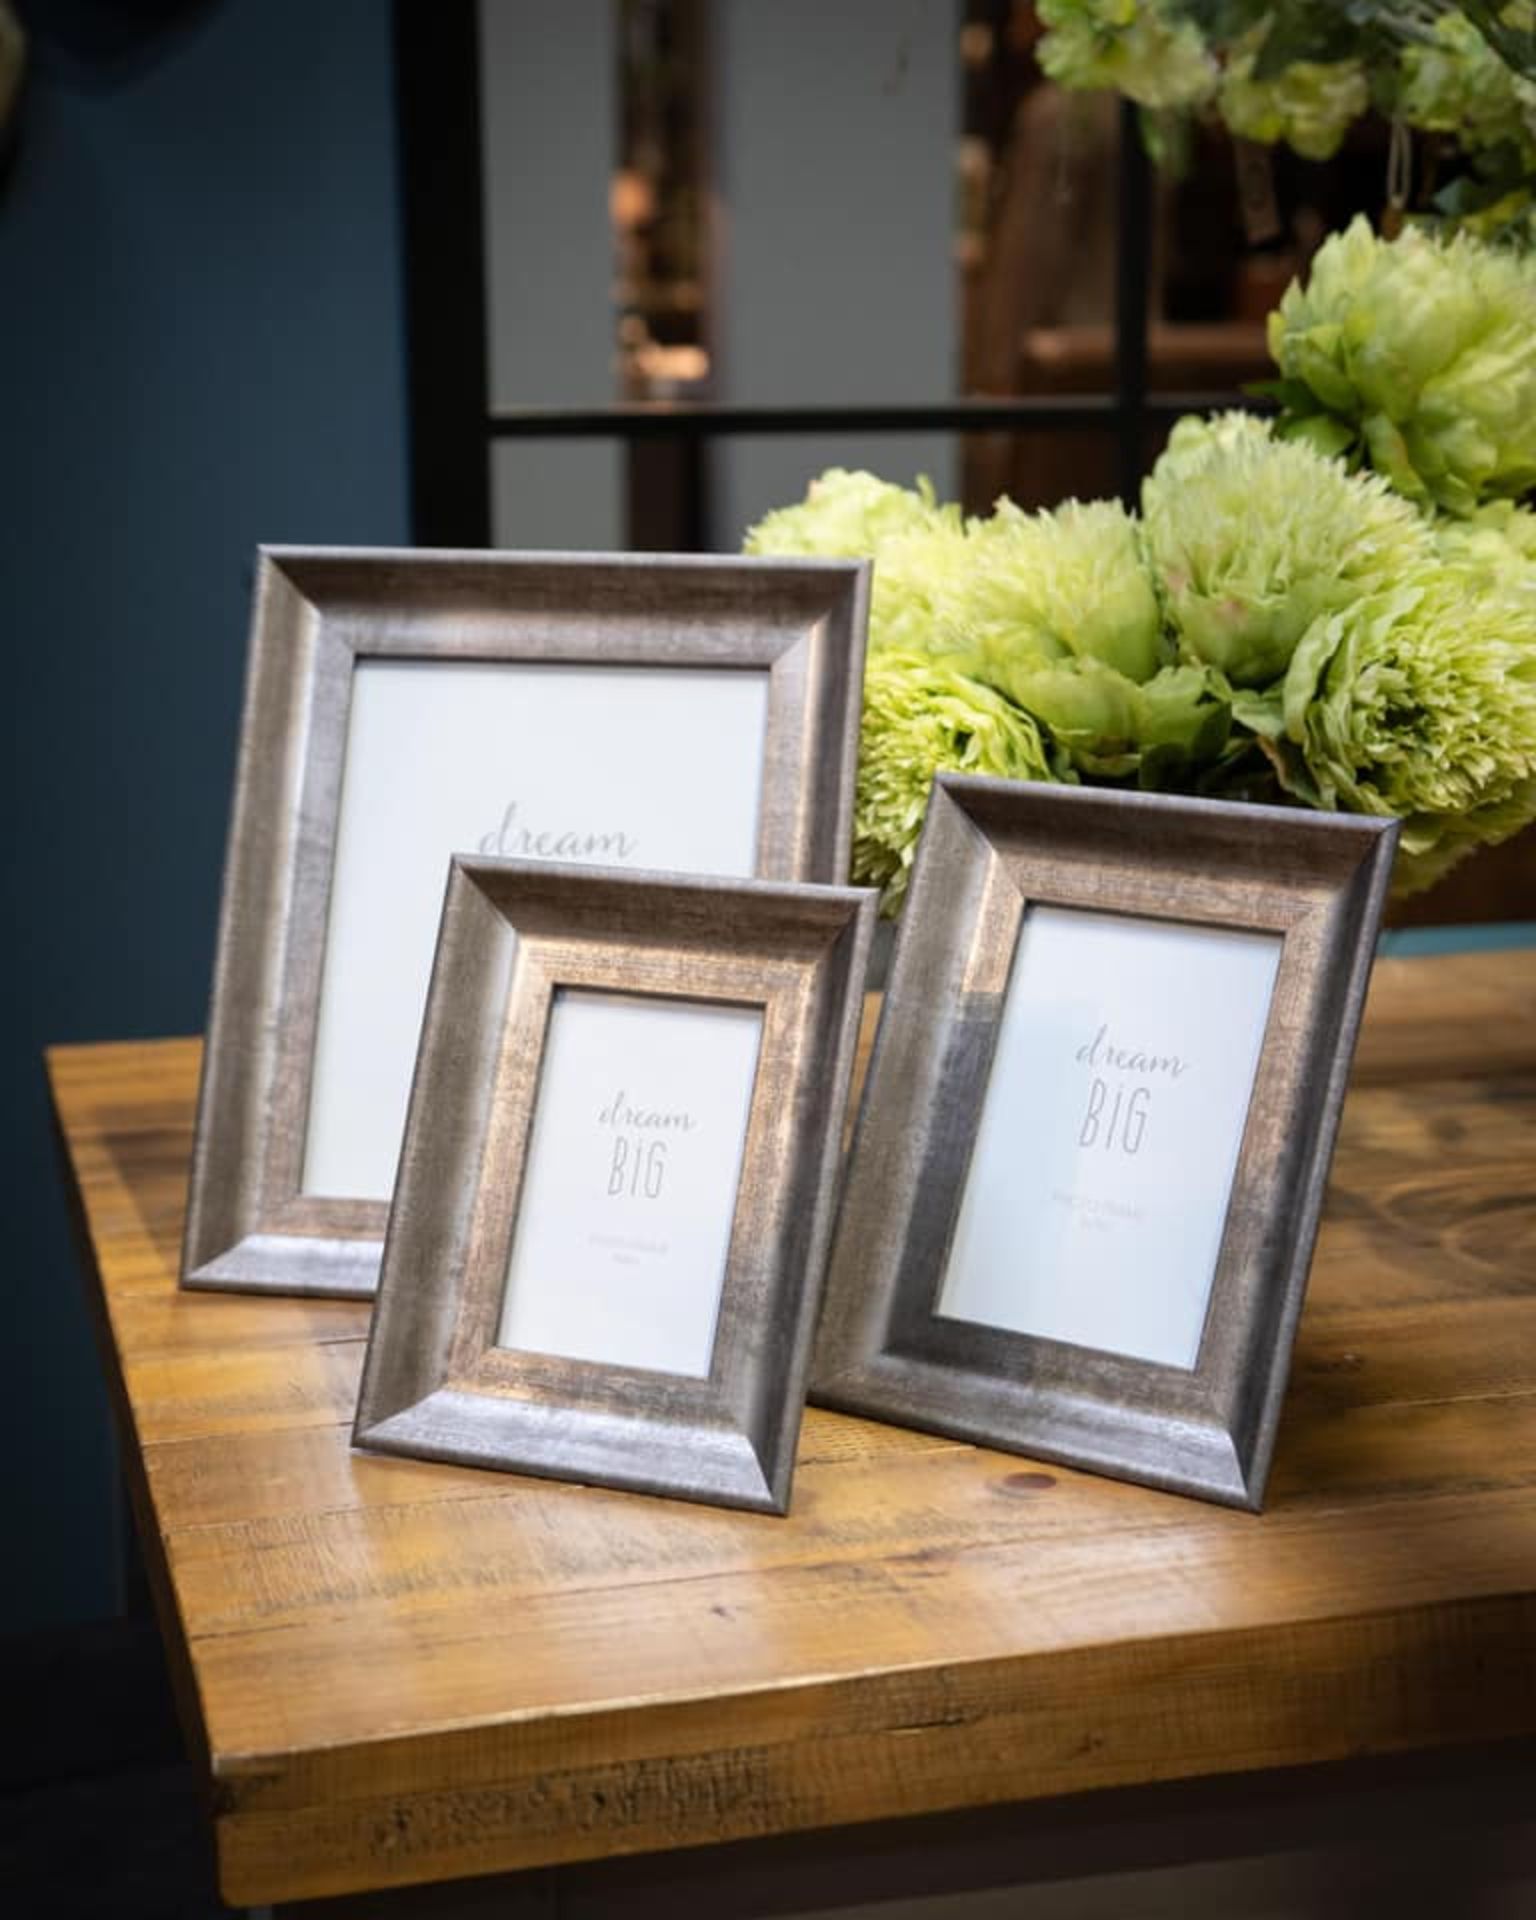 3 x White Washed Wood Photo Frame 4X6 Wood And Finished In A Washed Grey Colour Ensures This Neutral